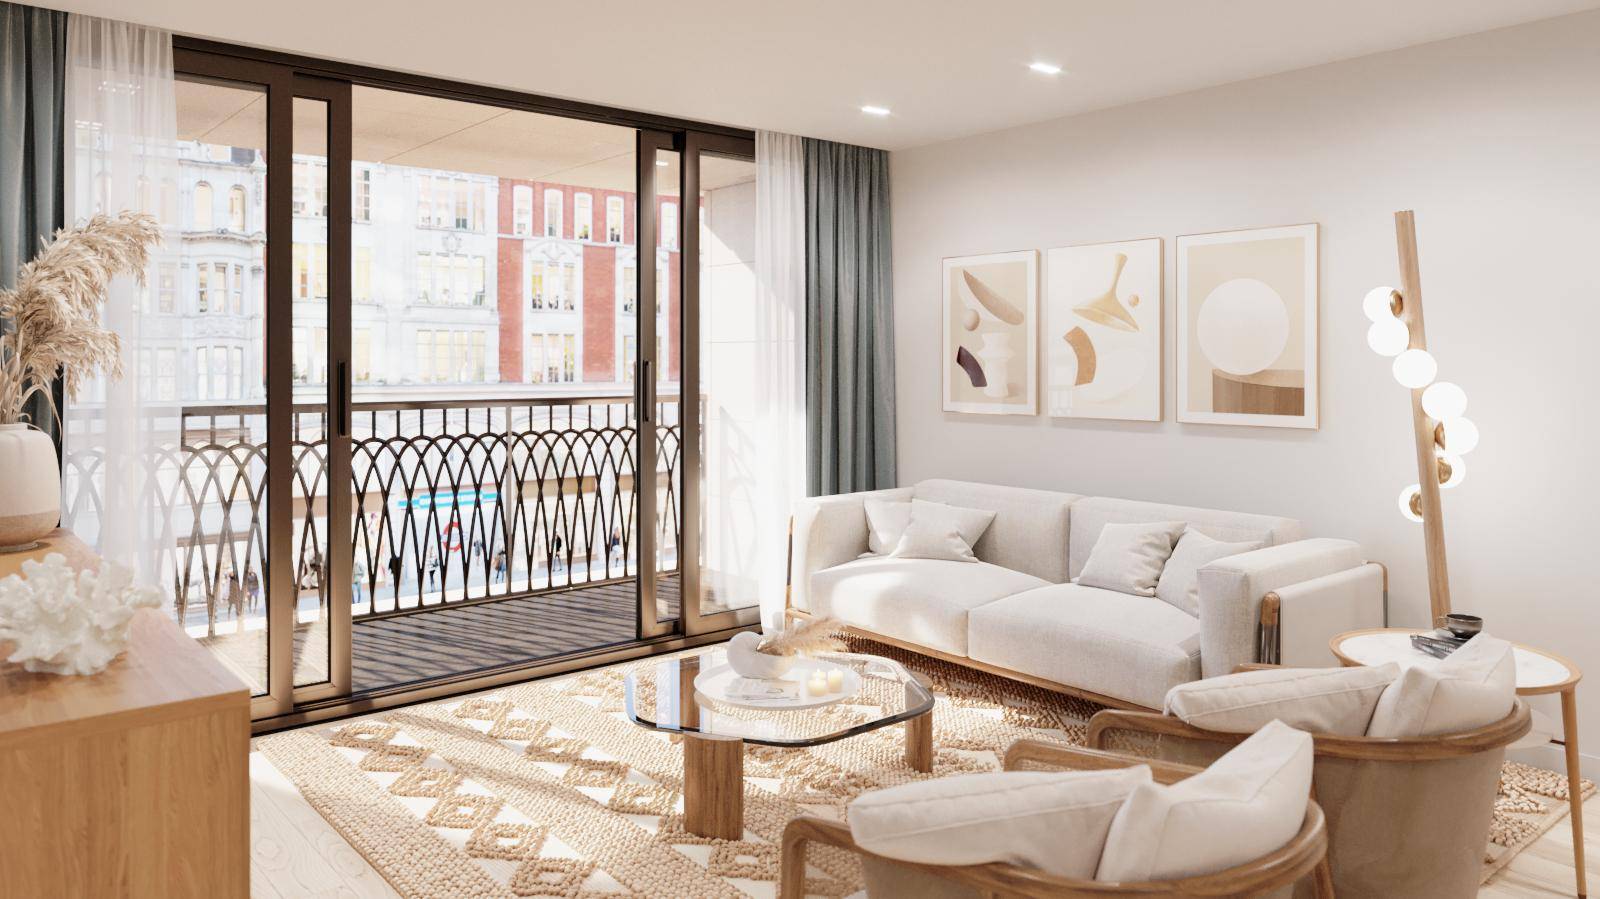 A first-floor contemporary one bedroom apartment at the highly anticipated Marylebone Square Residences, situated in Marylebone Village.